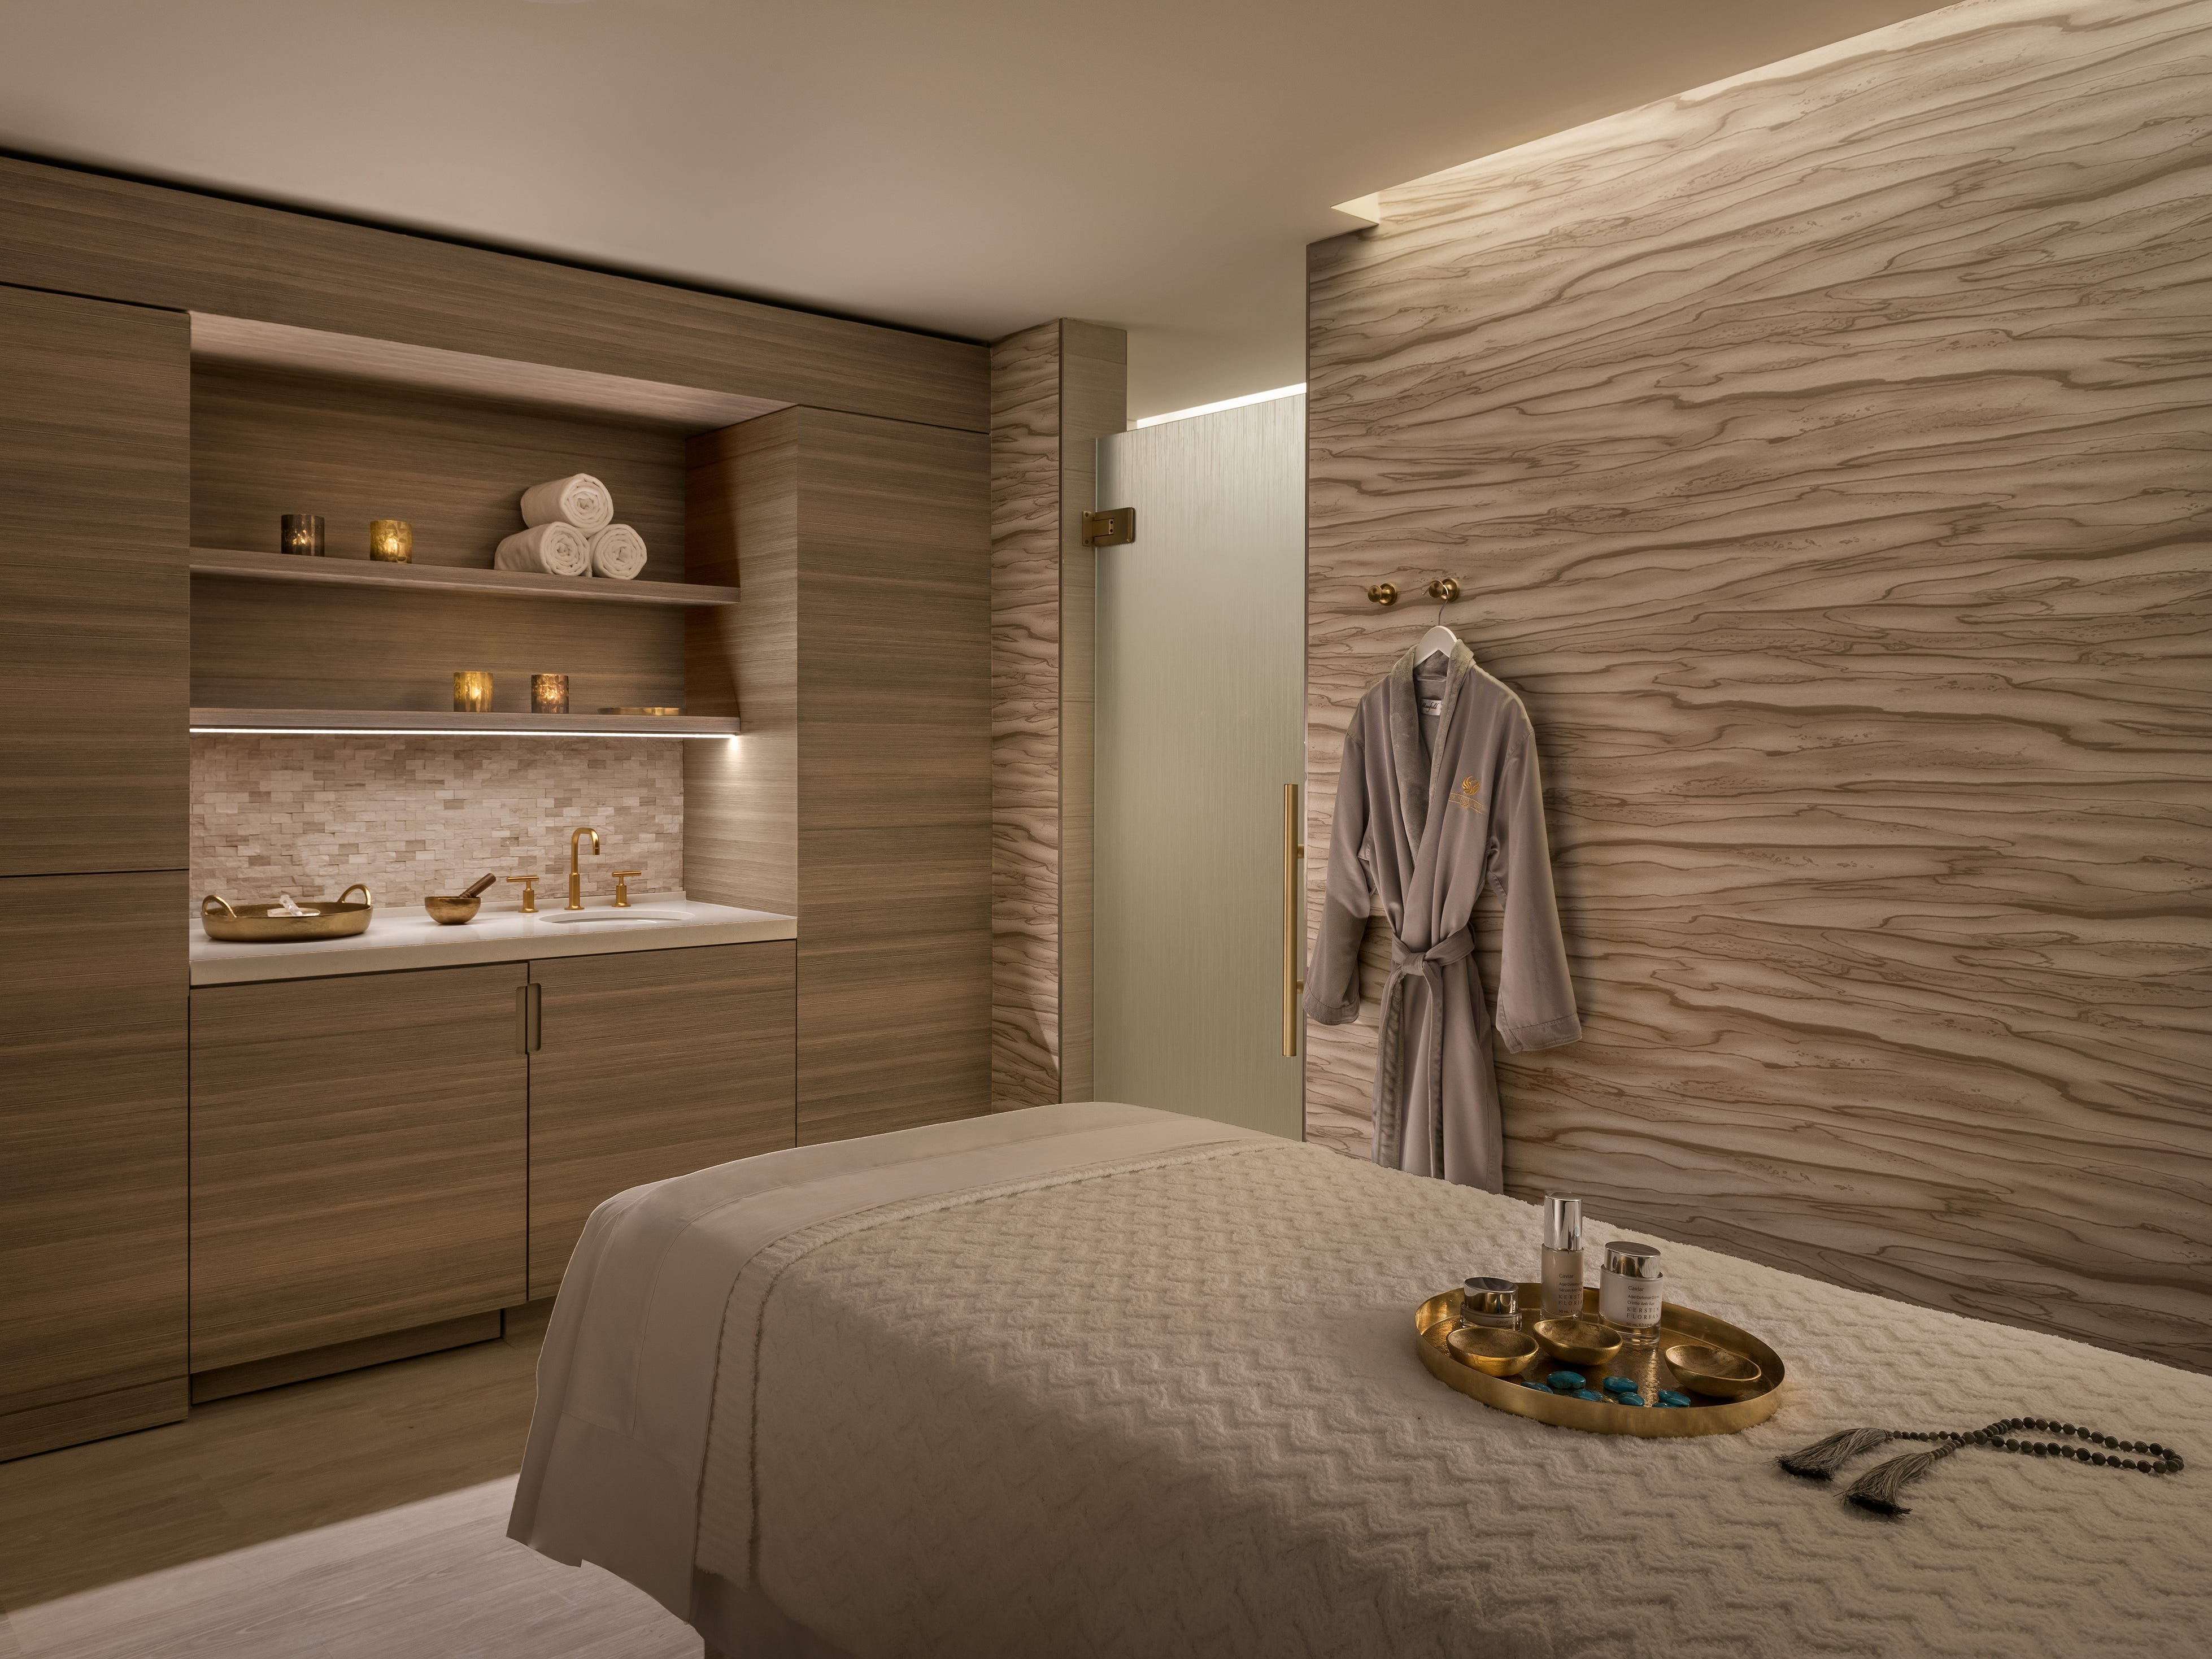 <p>The Phoenician Spa, which won the Forbes Travel Guide Five Star Award in 2024 for the fifth consecutive year, has 24 treatment rooms, a rooftop pool, a fitness center, a sauna, and a room dedicated to peace and quiet. There's also a boutique, a dry bar, and a nail salon. </p>